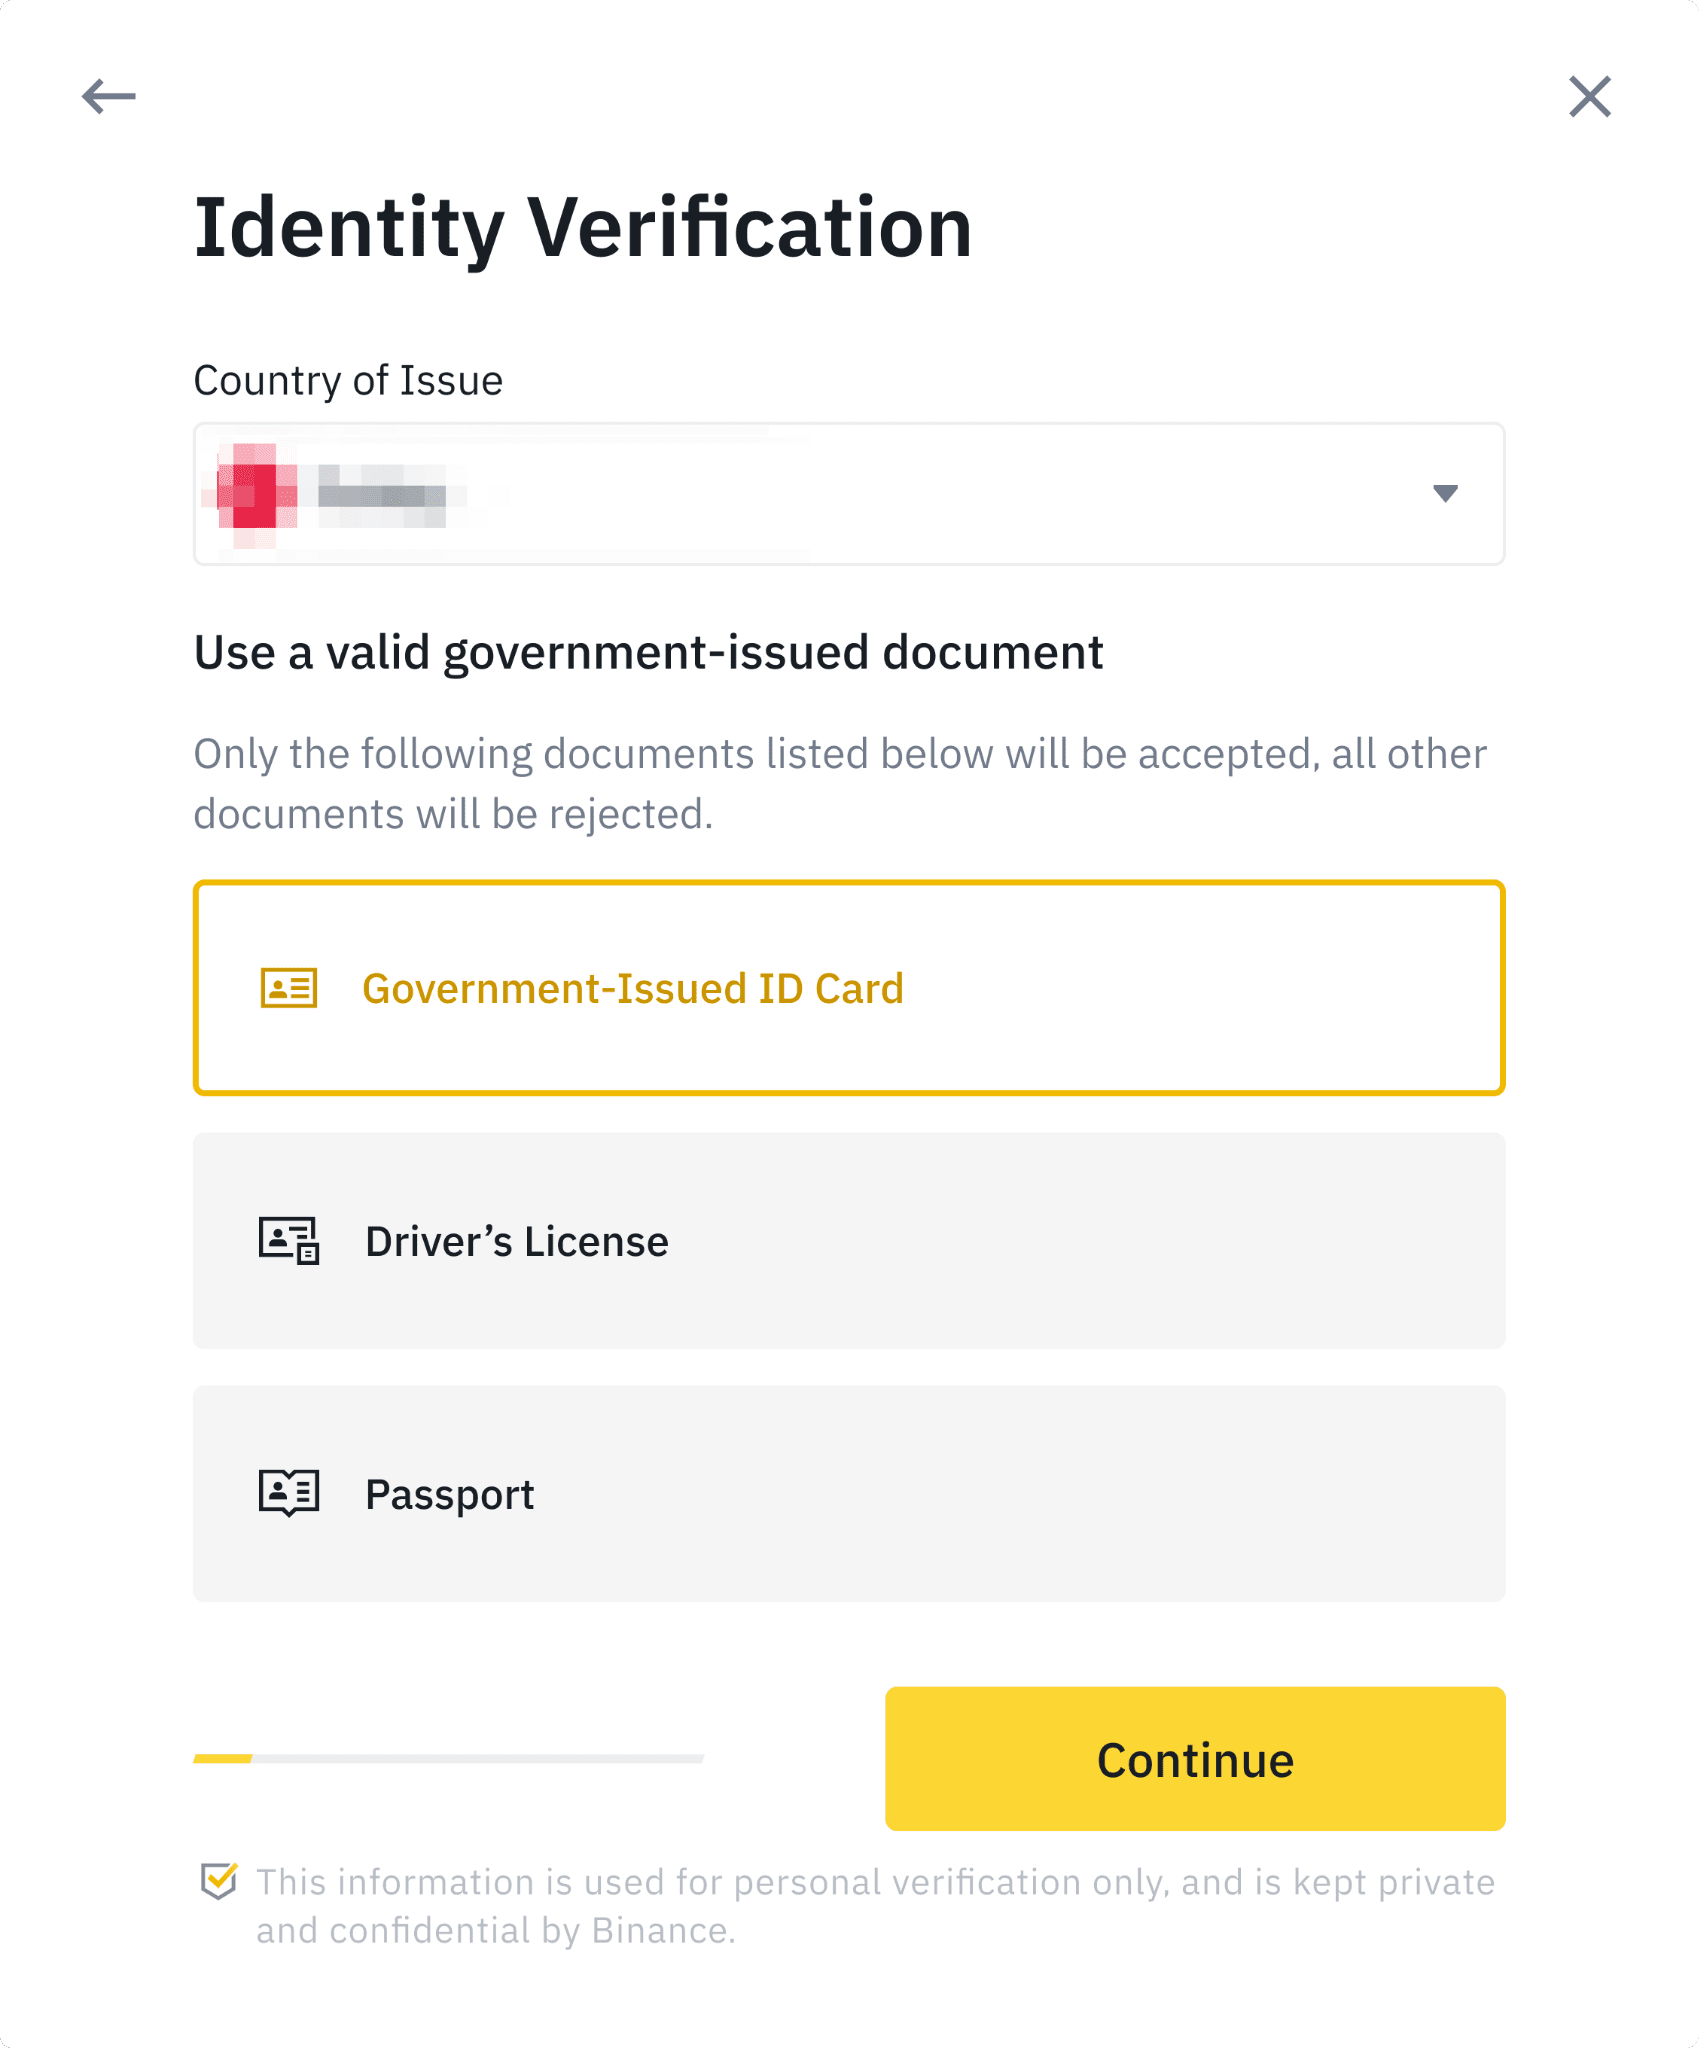 FRCST | How to Complete Identity Verification on Binance | Trade and Invest in Crypto